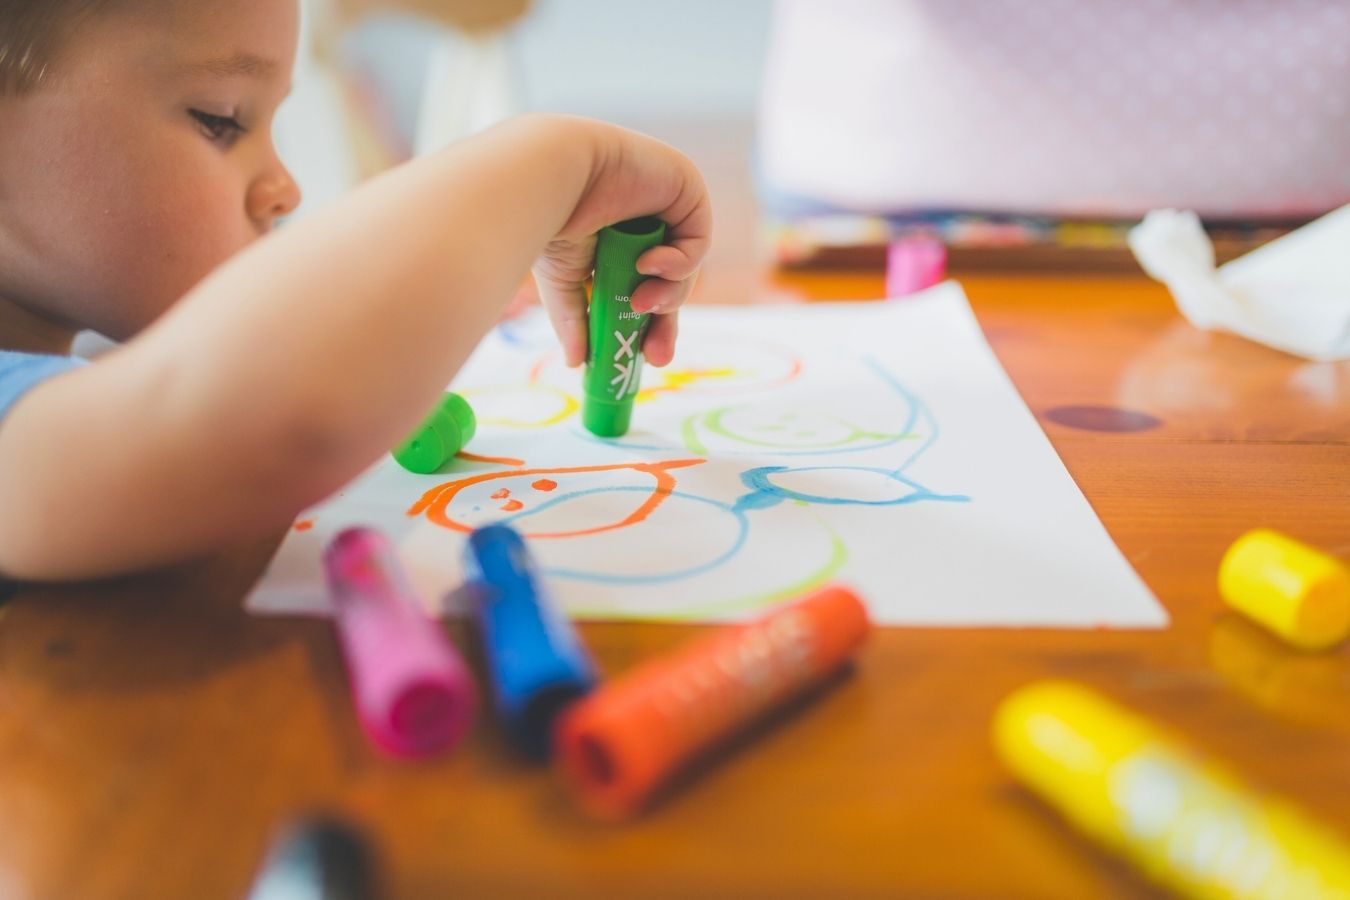 Child Drawing With Colored Pencils